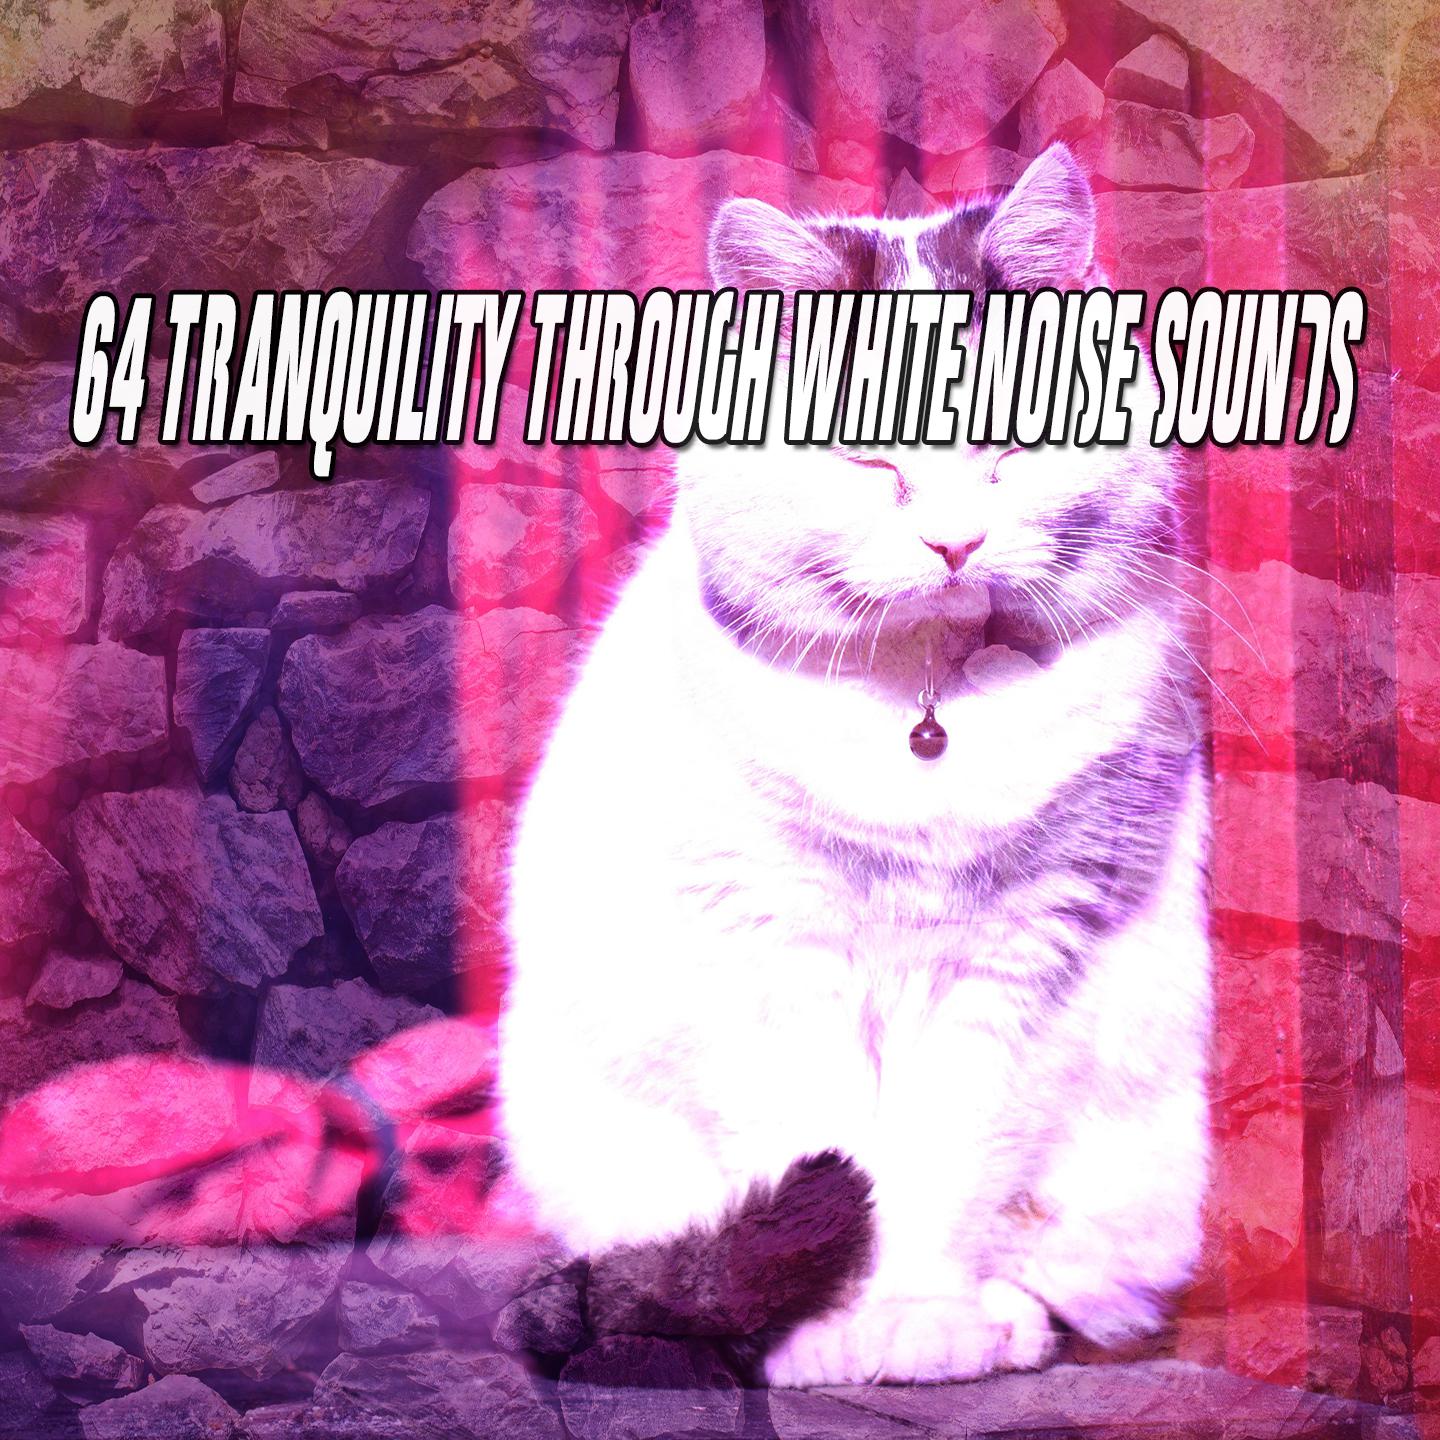 64 Tranquility Through White Noise Sounds